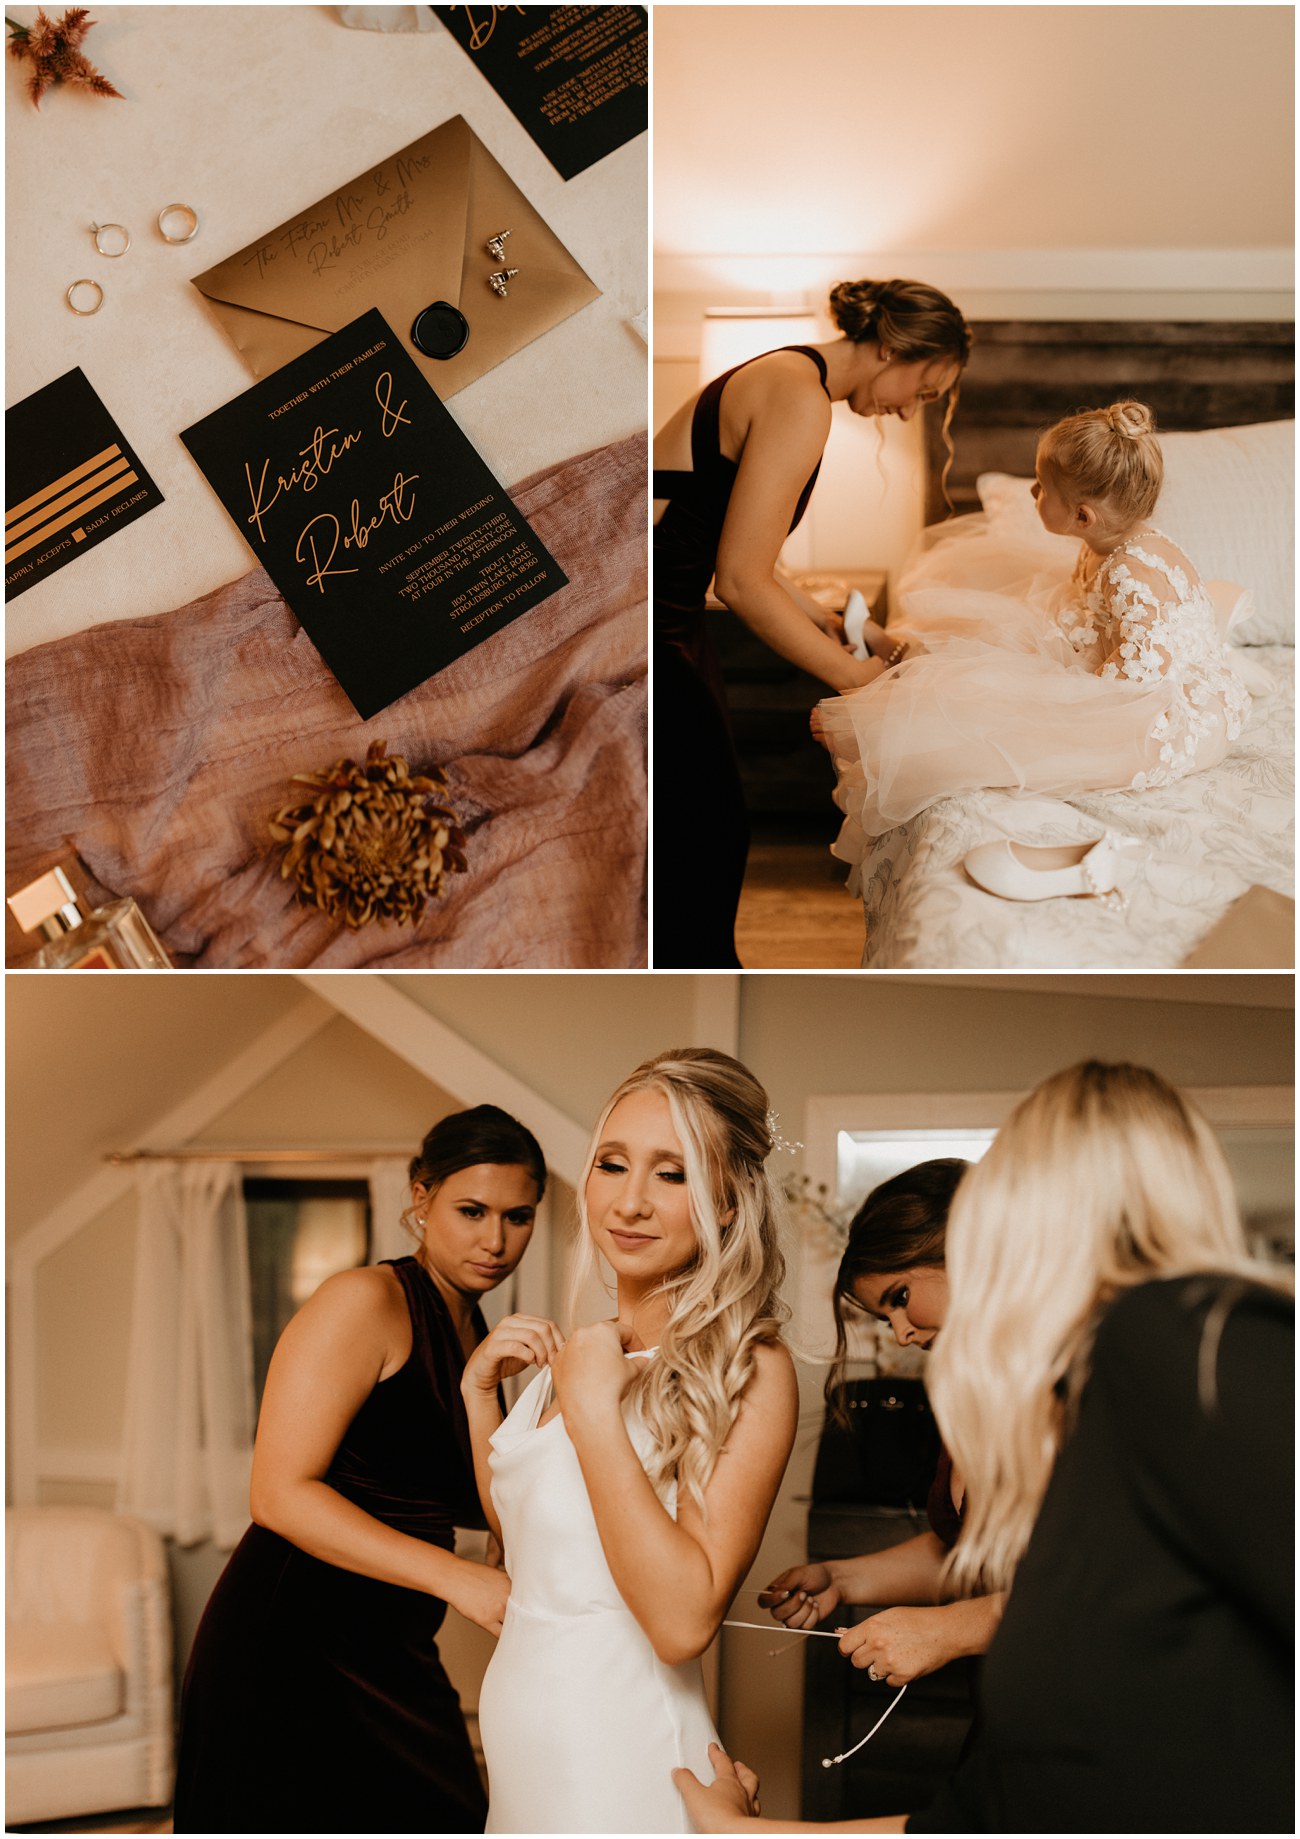 Collage of Bride, her details, and her wedding party in the bridal suite at Trout Lake wedding